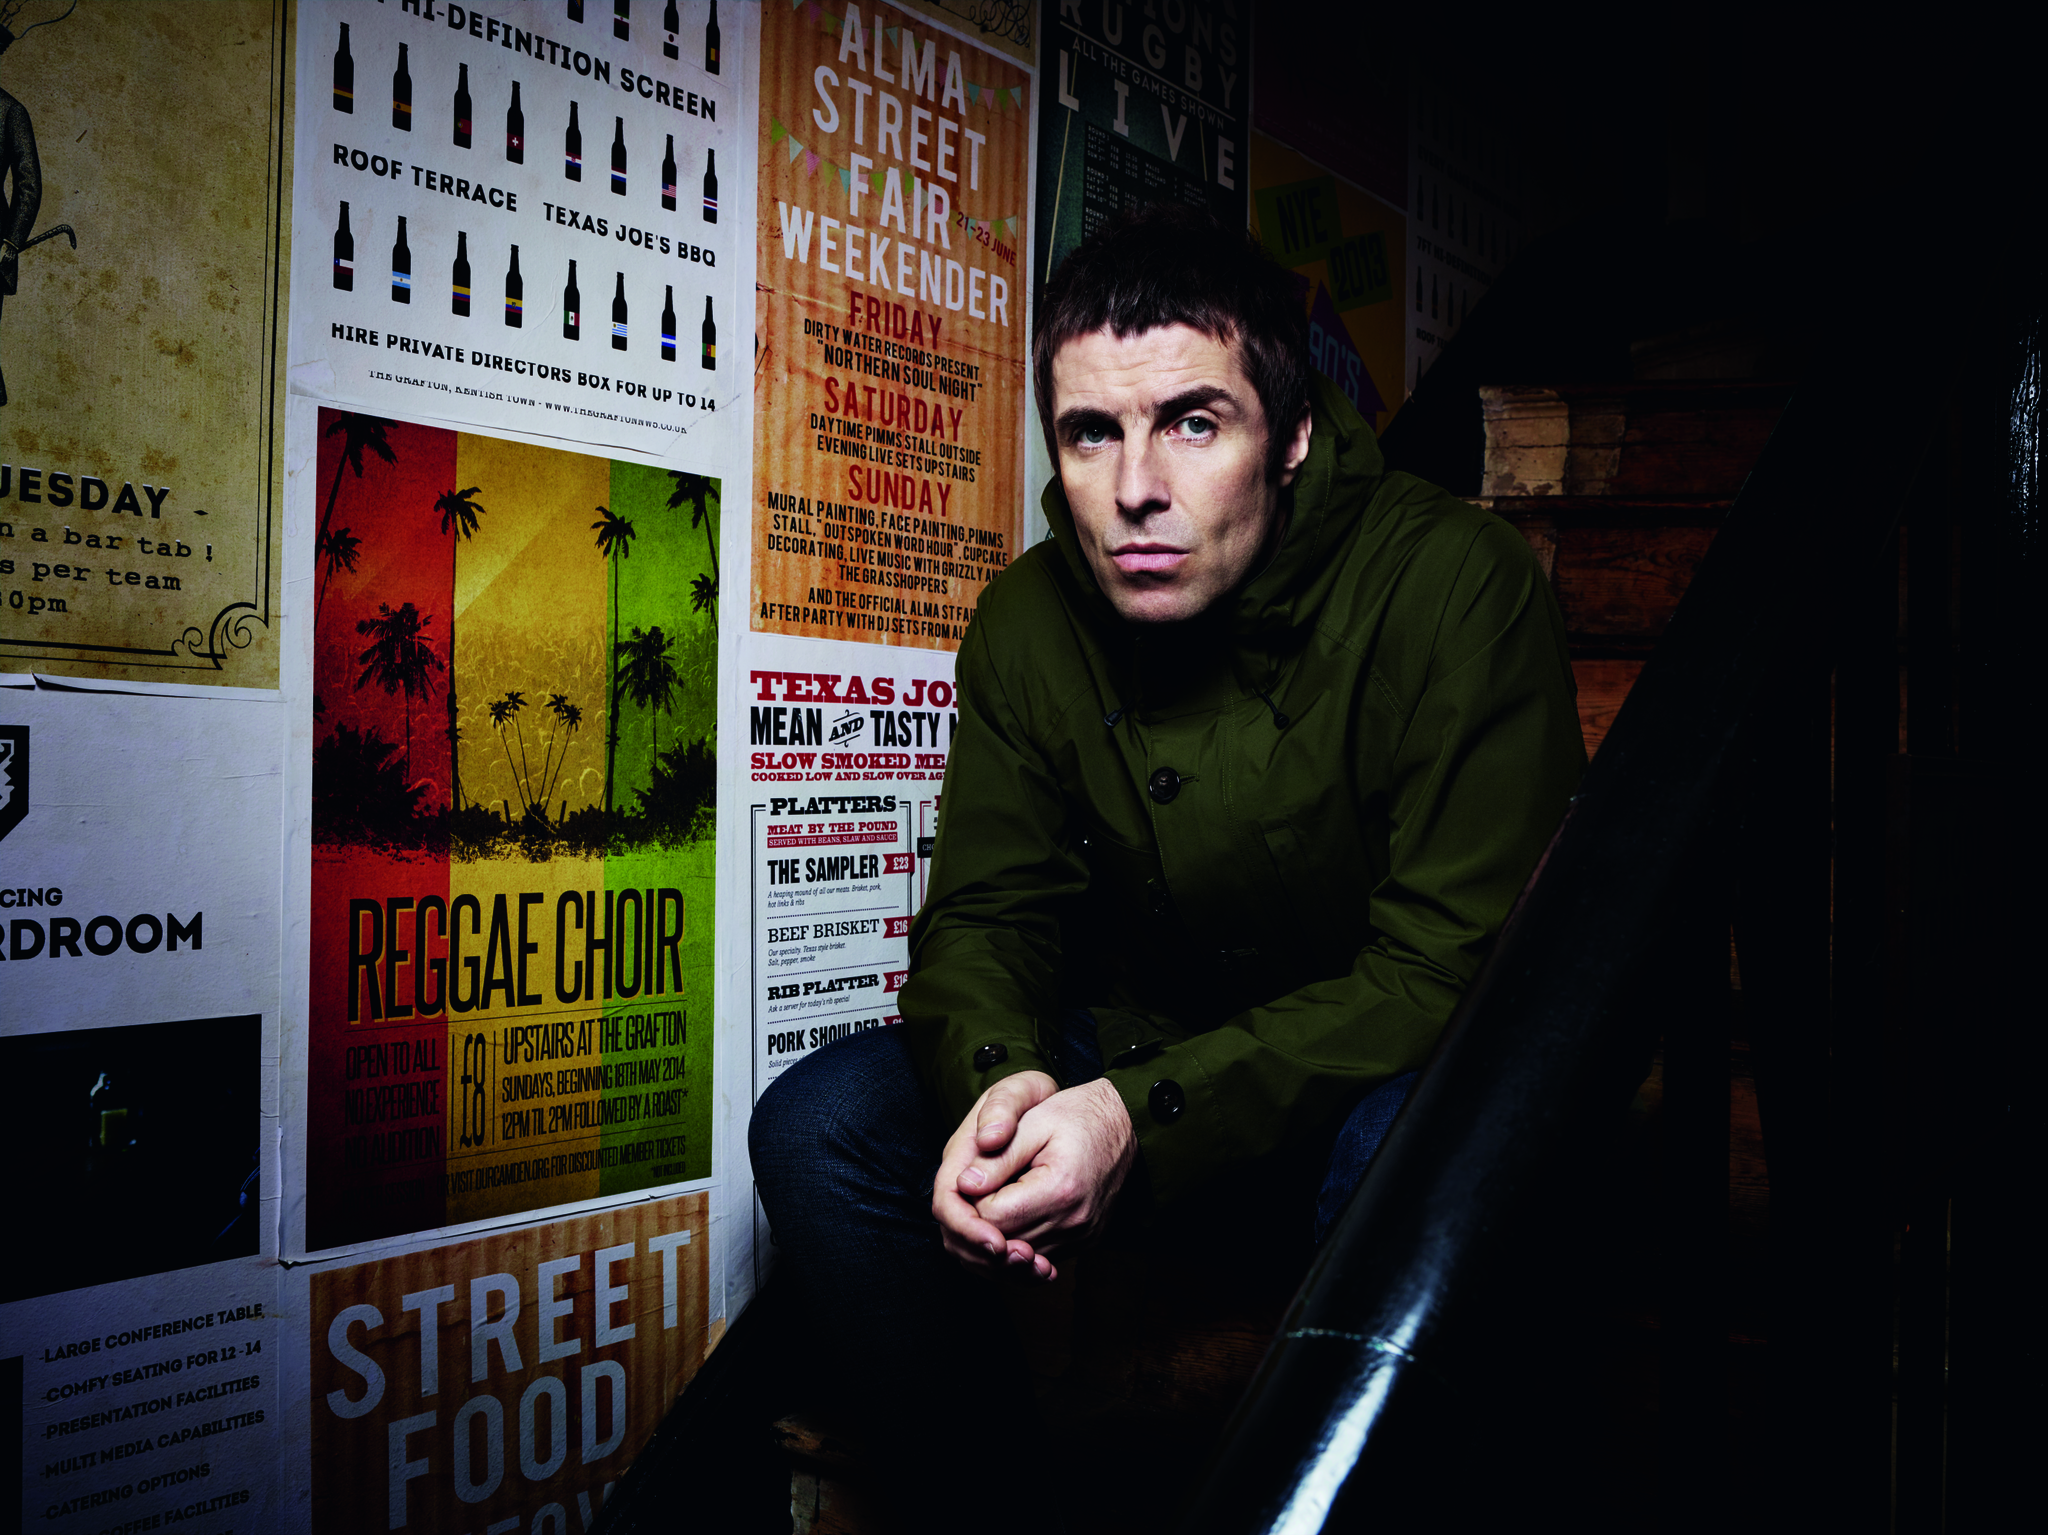 Liam Gallagher New Album, Video and Tour Set For Late Summer & Fall 2017